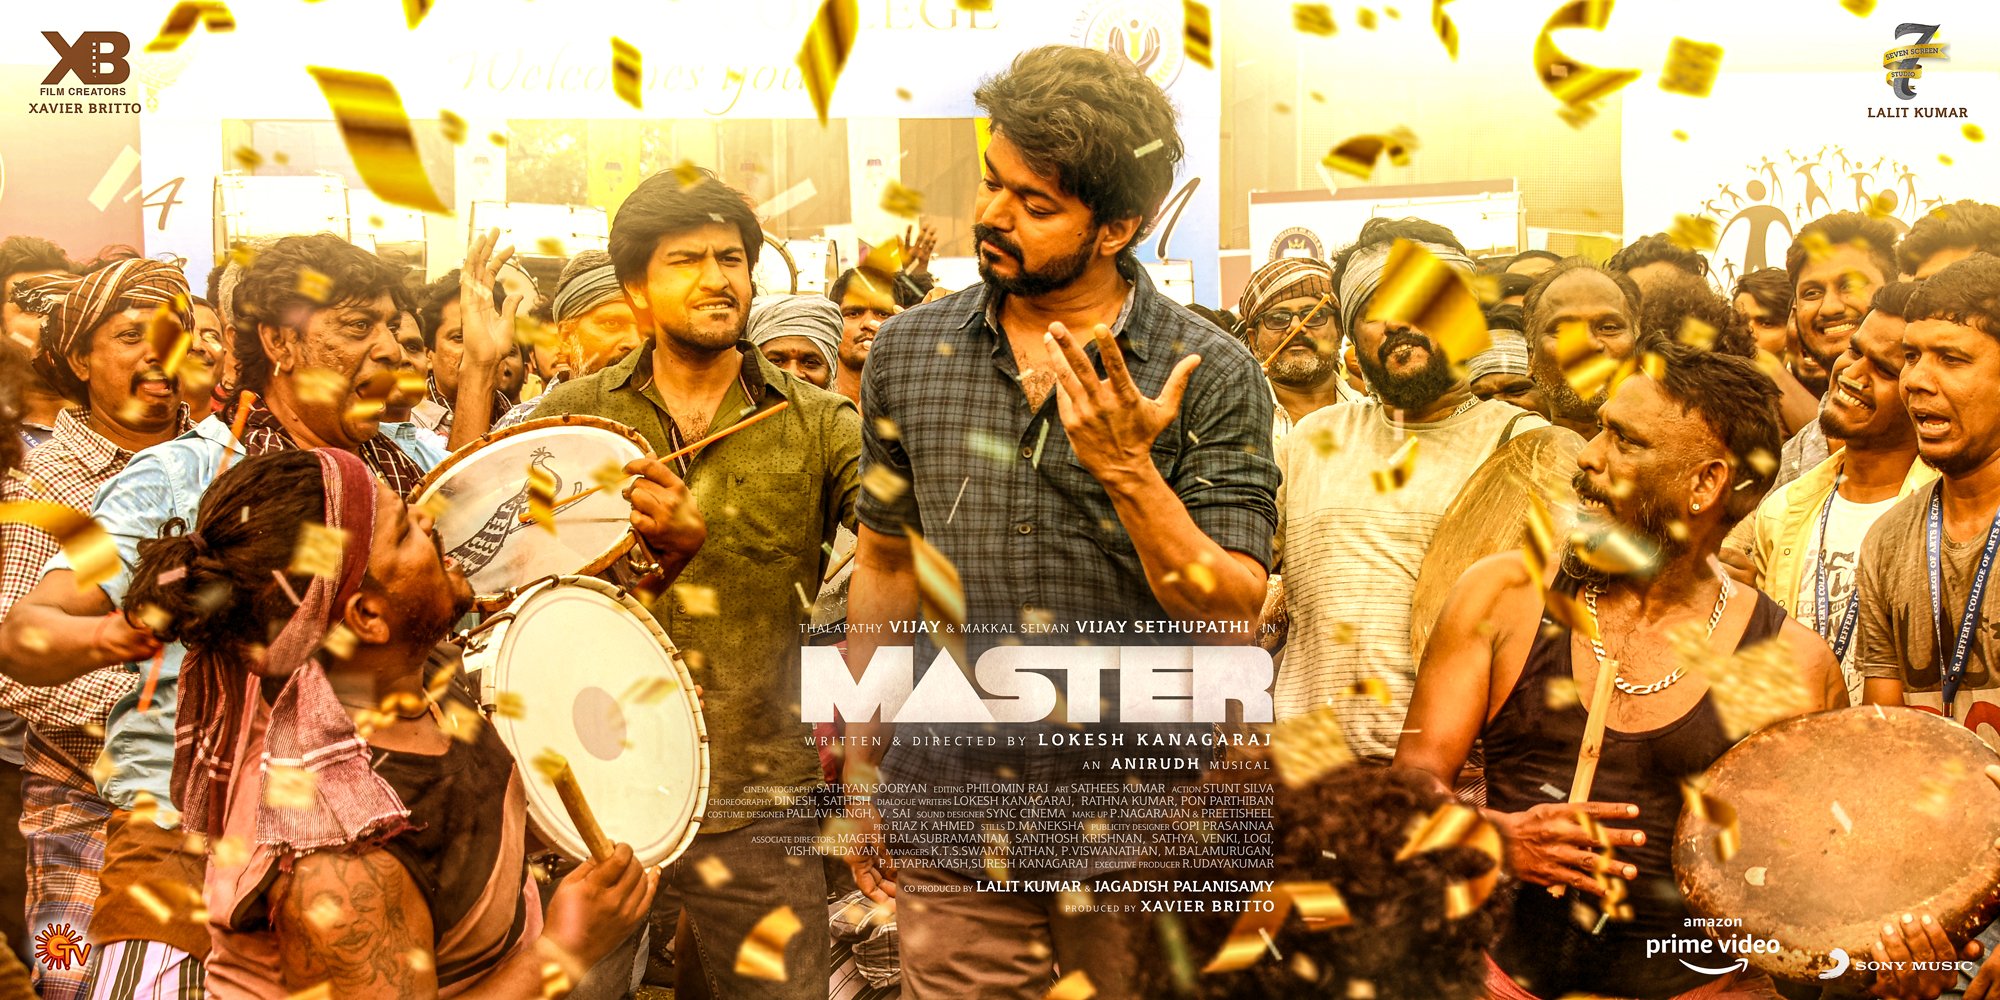 Thalapathy Vijay shares an exciting news on Master which is directed by Lokesh Kanagaraj